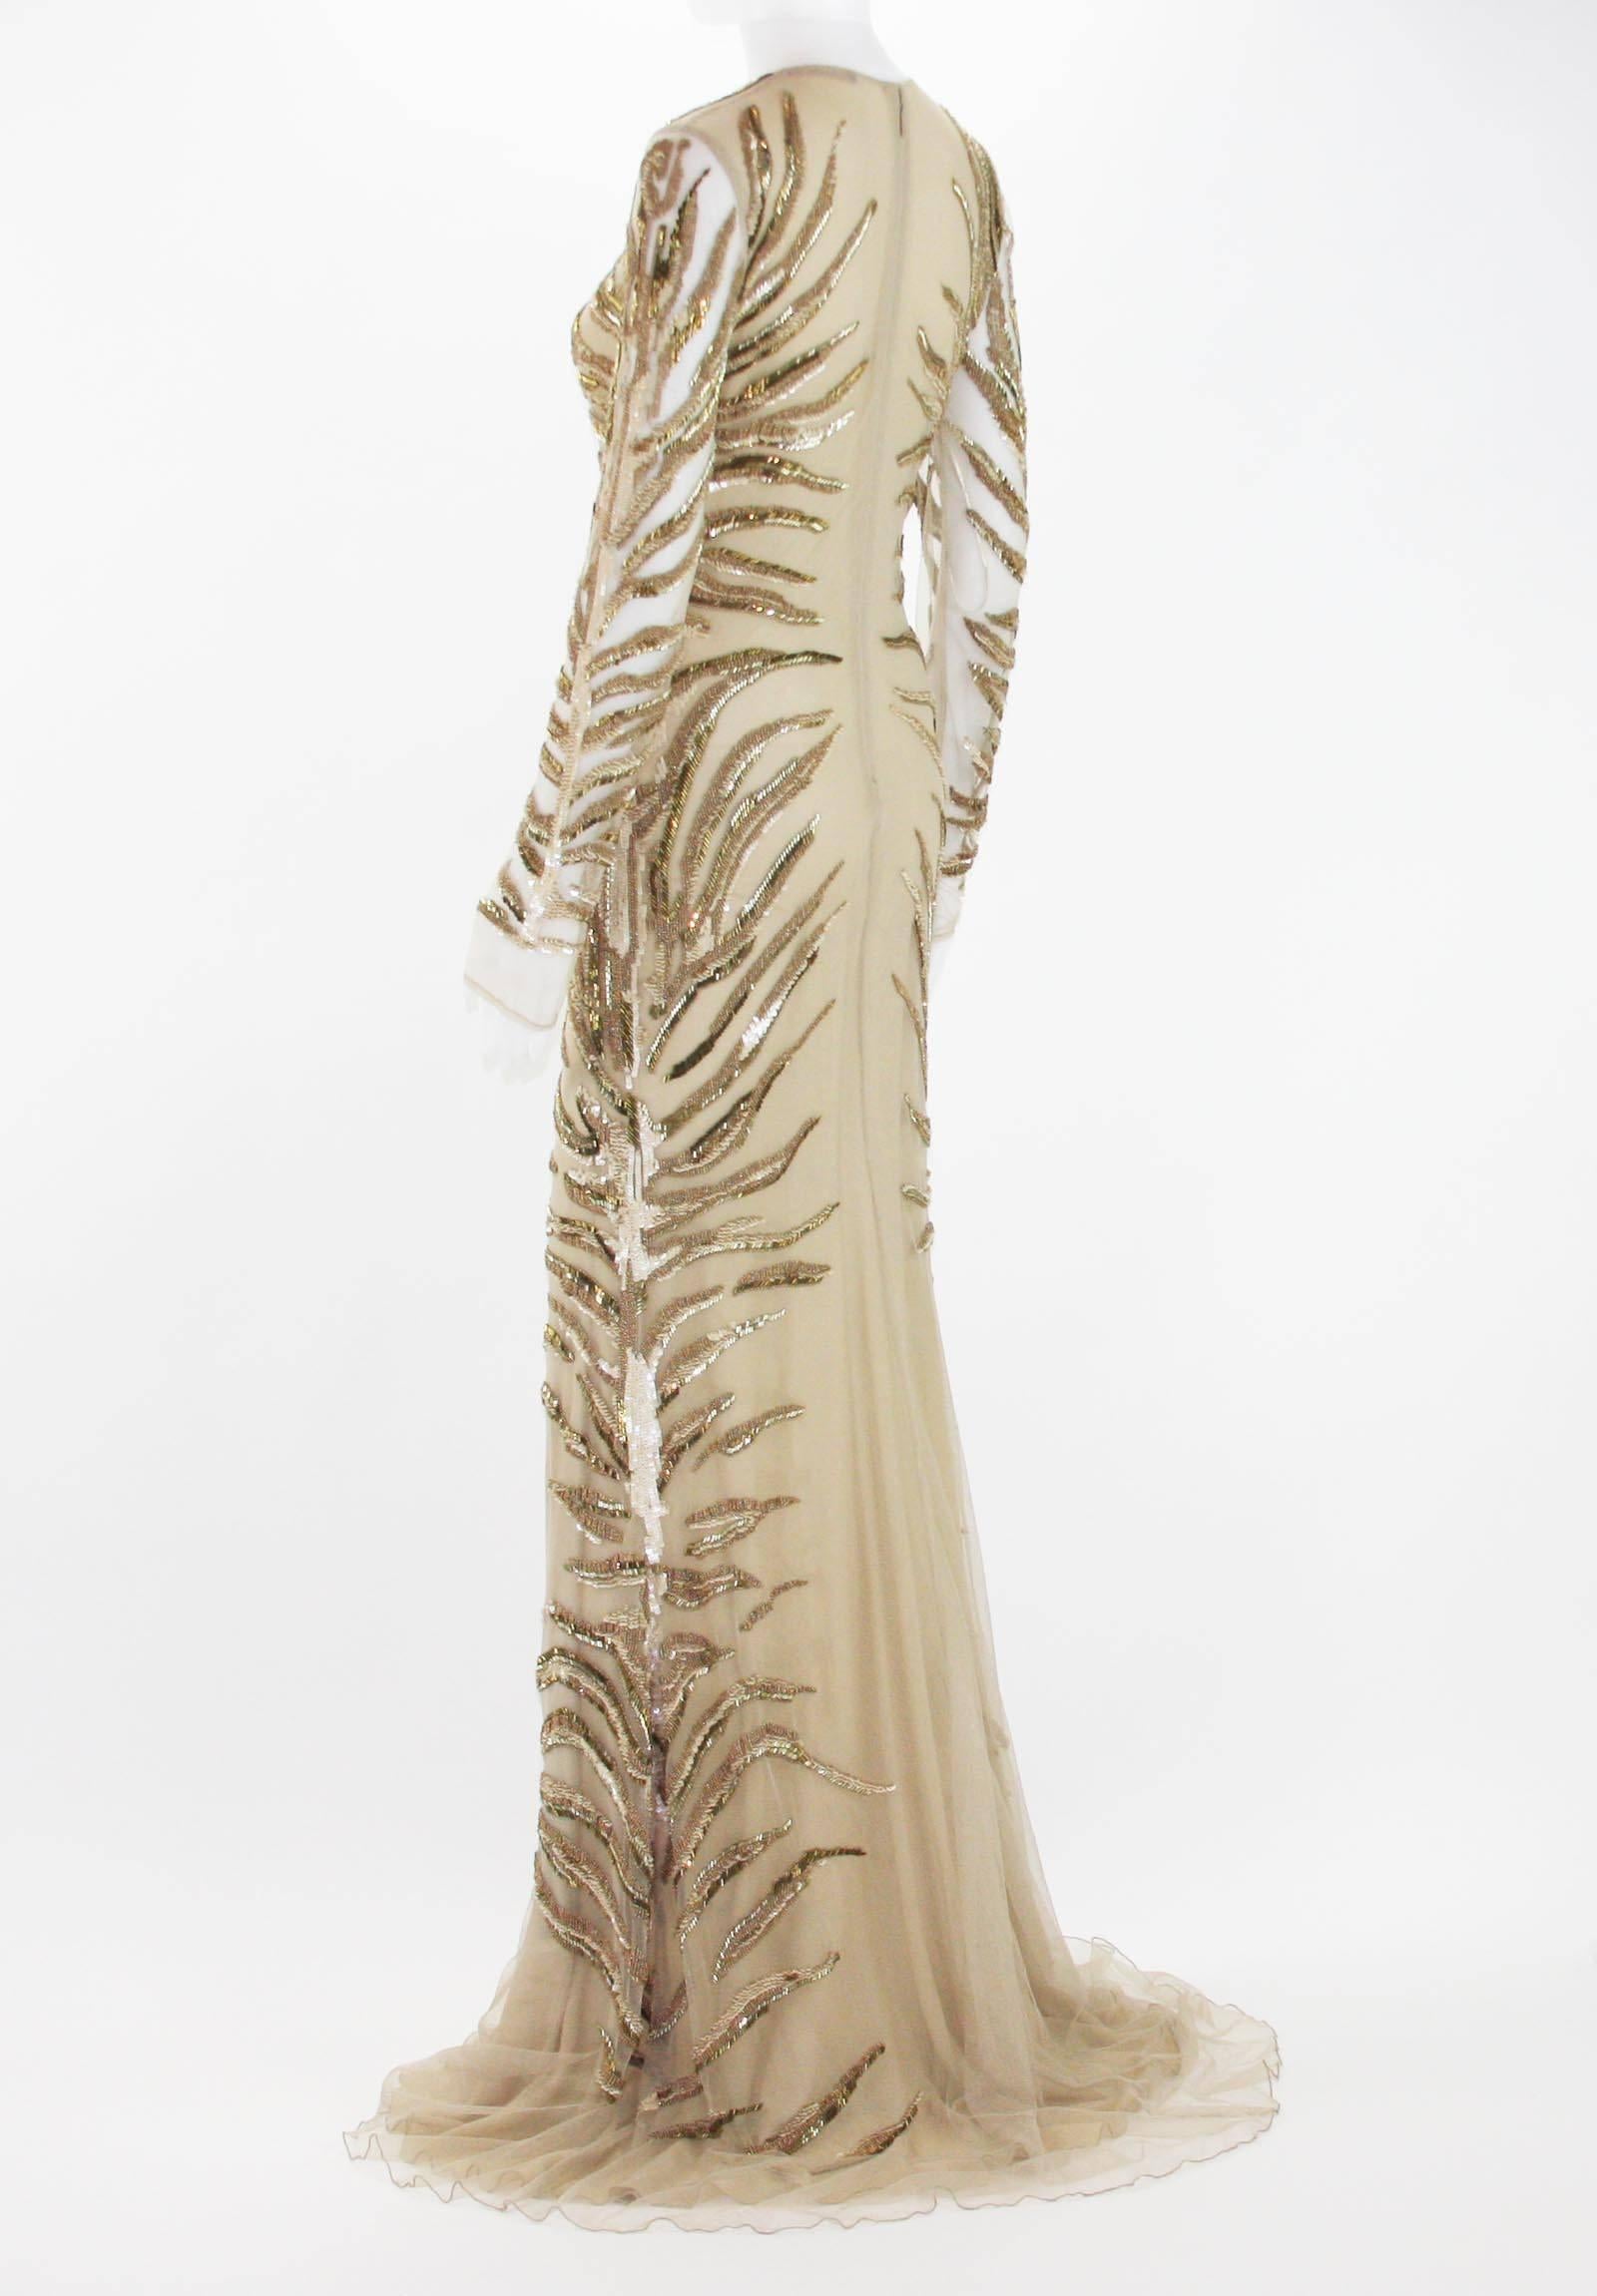 Women's New Roberto Cavalli Nude Beaded Embroidery Mesh Dress Gown size 40